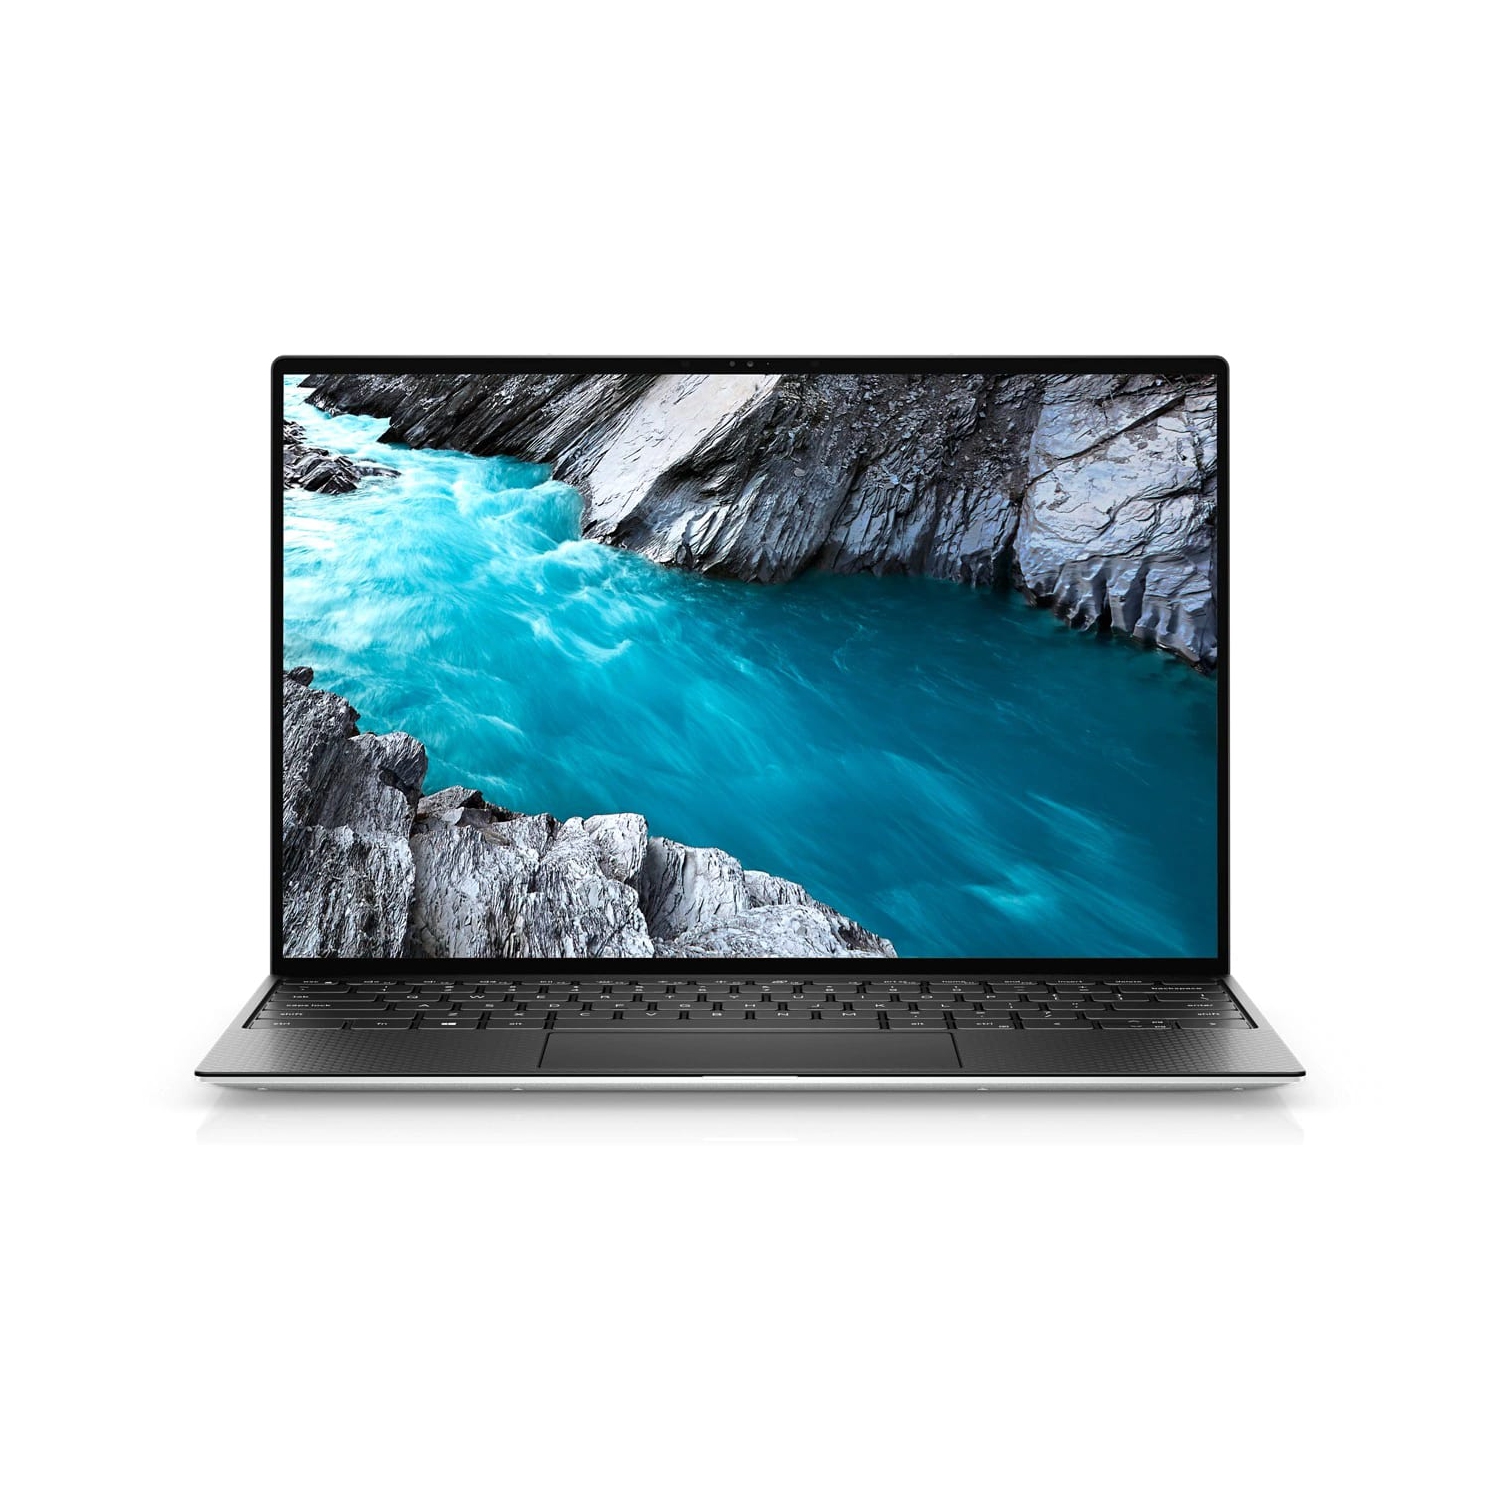 Refurbished (Excellent) - Dell XPS 13 9310 Laptop (2020) | 13.4" 4K Touch | Core i5 - 256GB SSD - 8GB RAM | 4 Cores @ 4.2 GHz - 11th Gen CPU Certified Refurbished